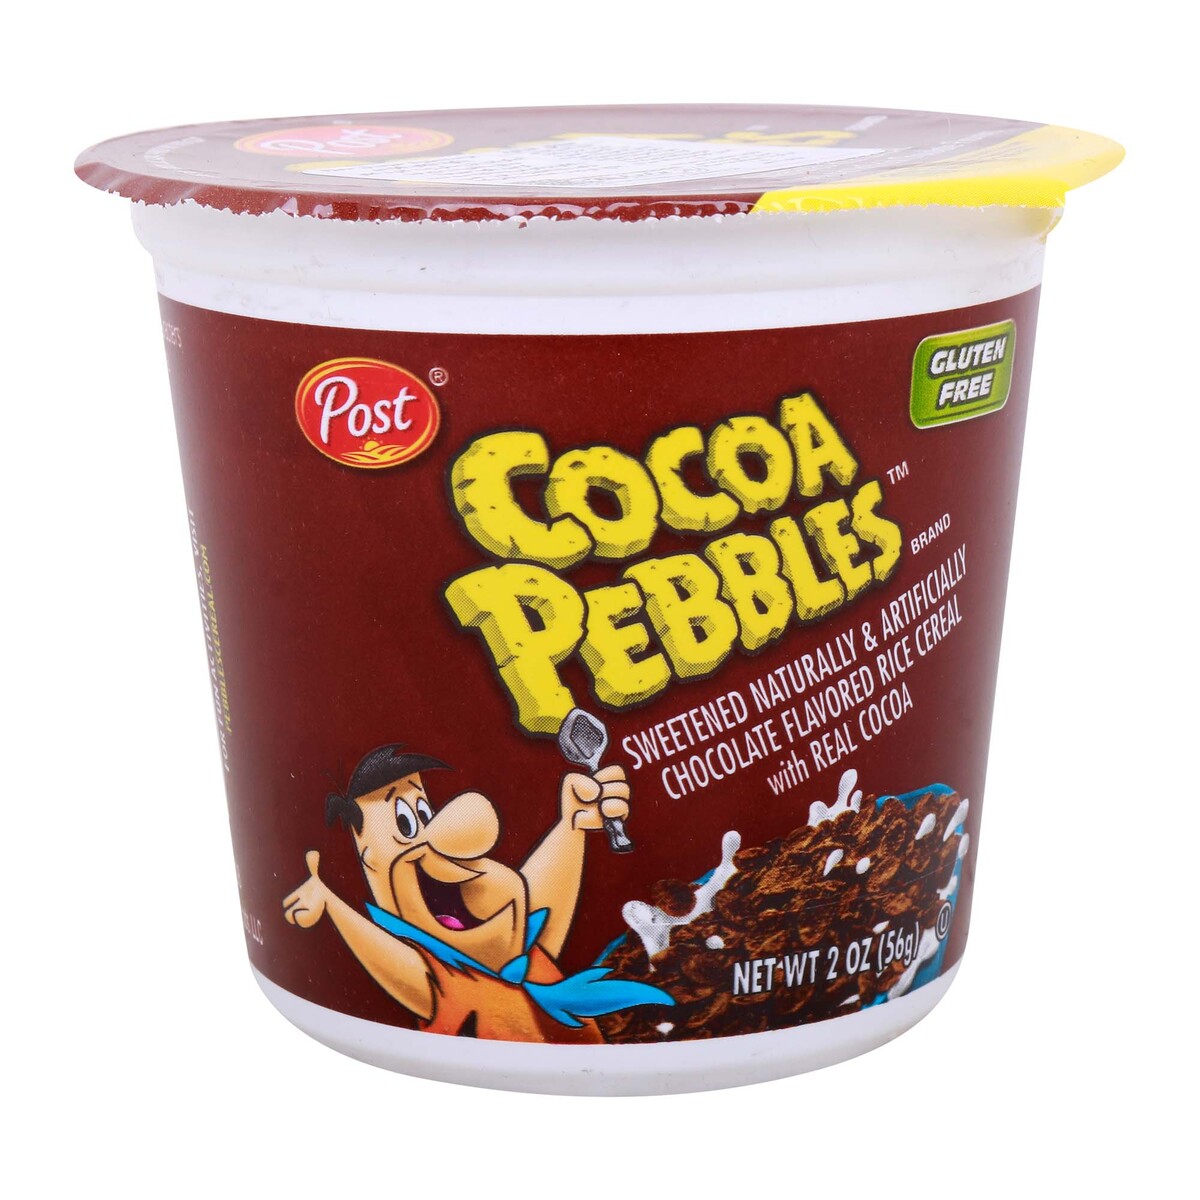 Post Cocoa Pebbles Sweetened Naturally & Artificially Chocolate Flavored Rice Cereal with Real Cocoa 56 g